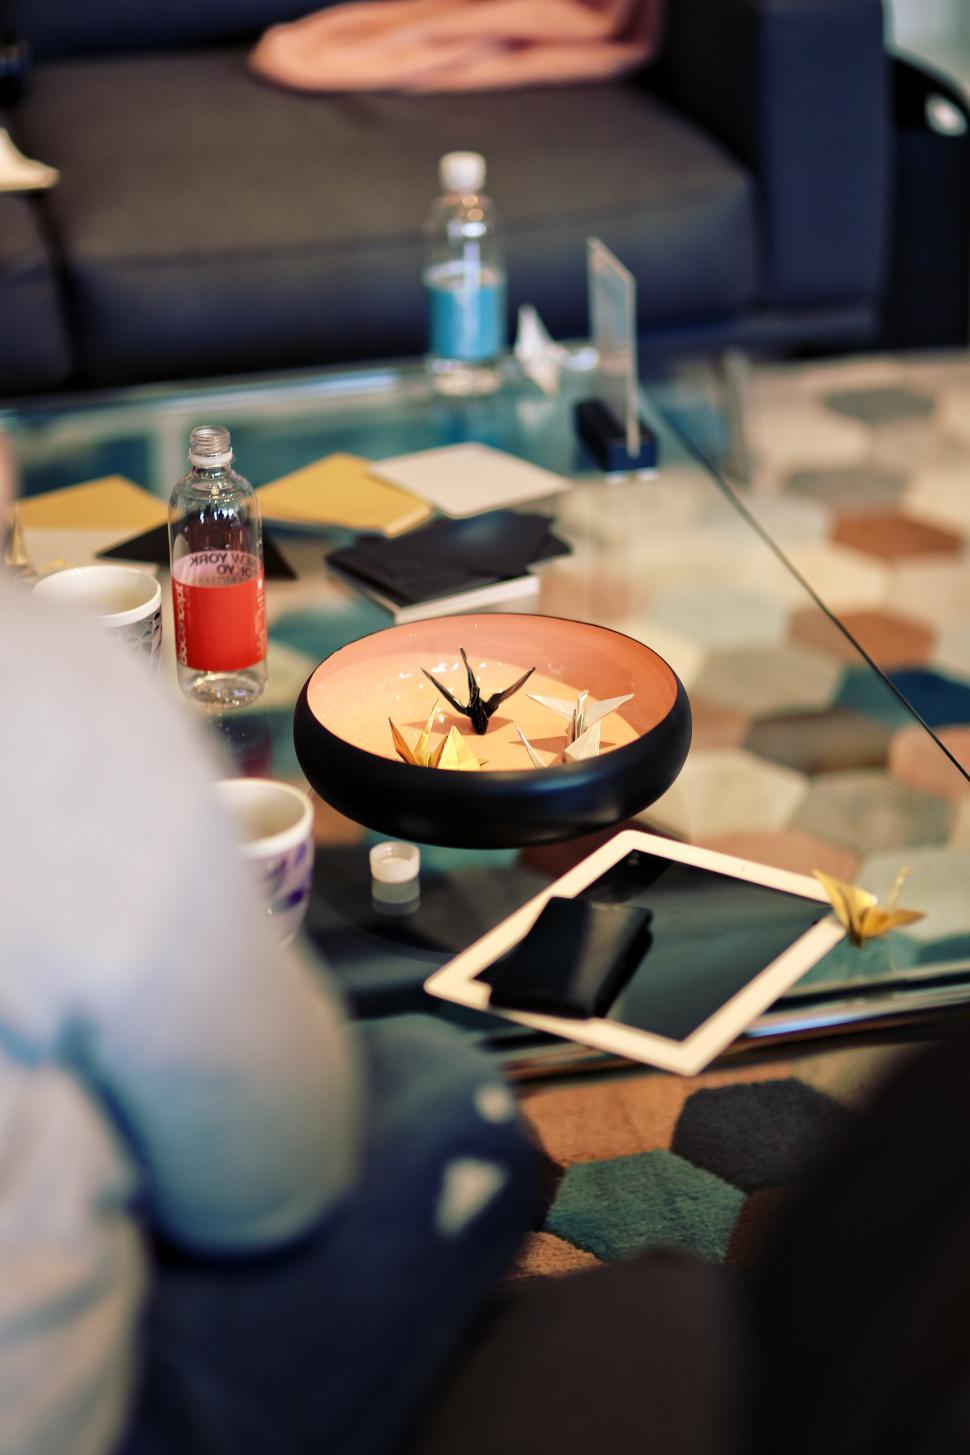 Free Image of Tablet and Plate on Table 